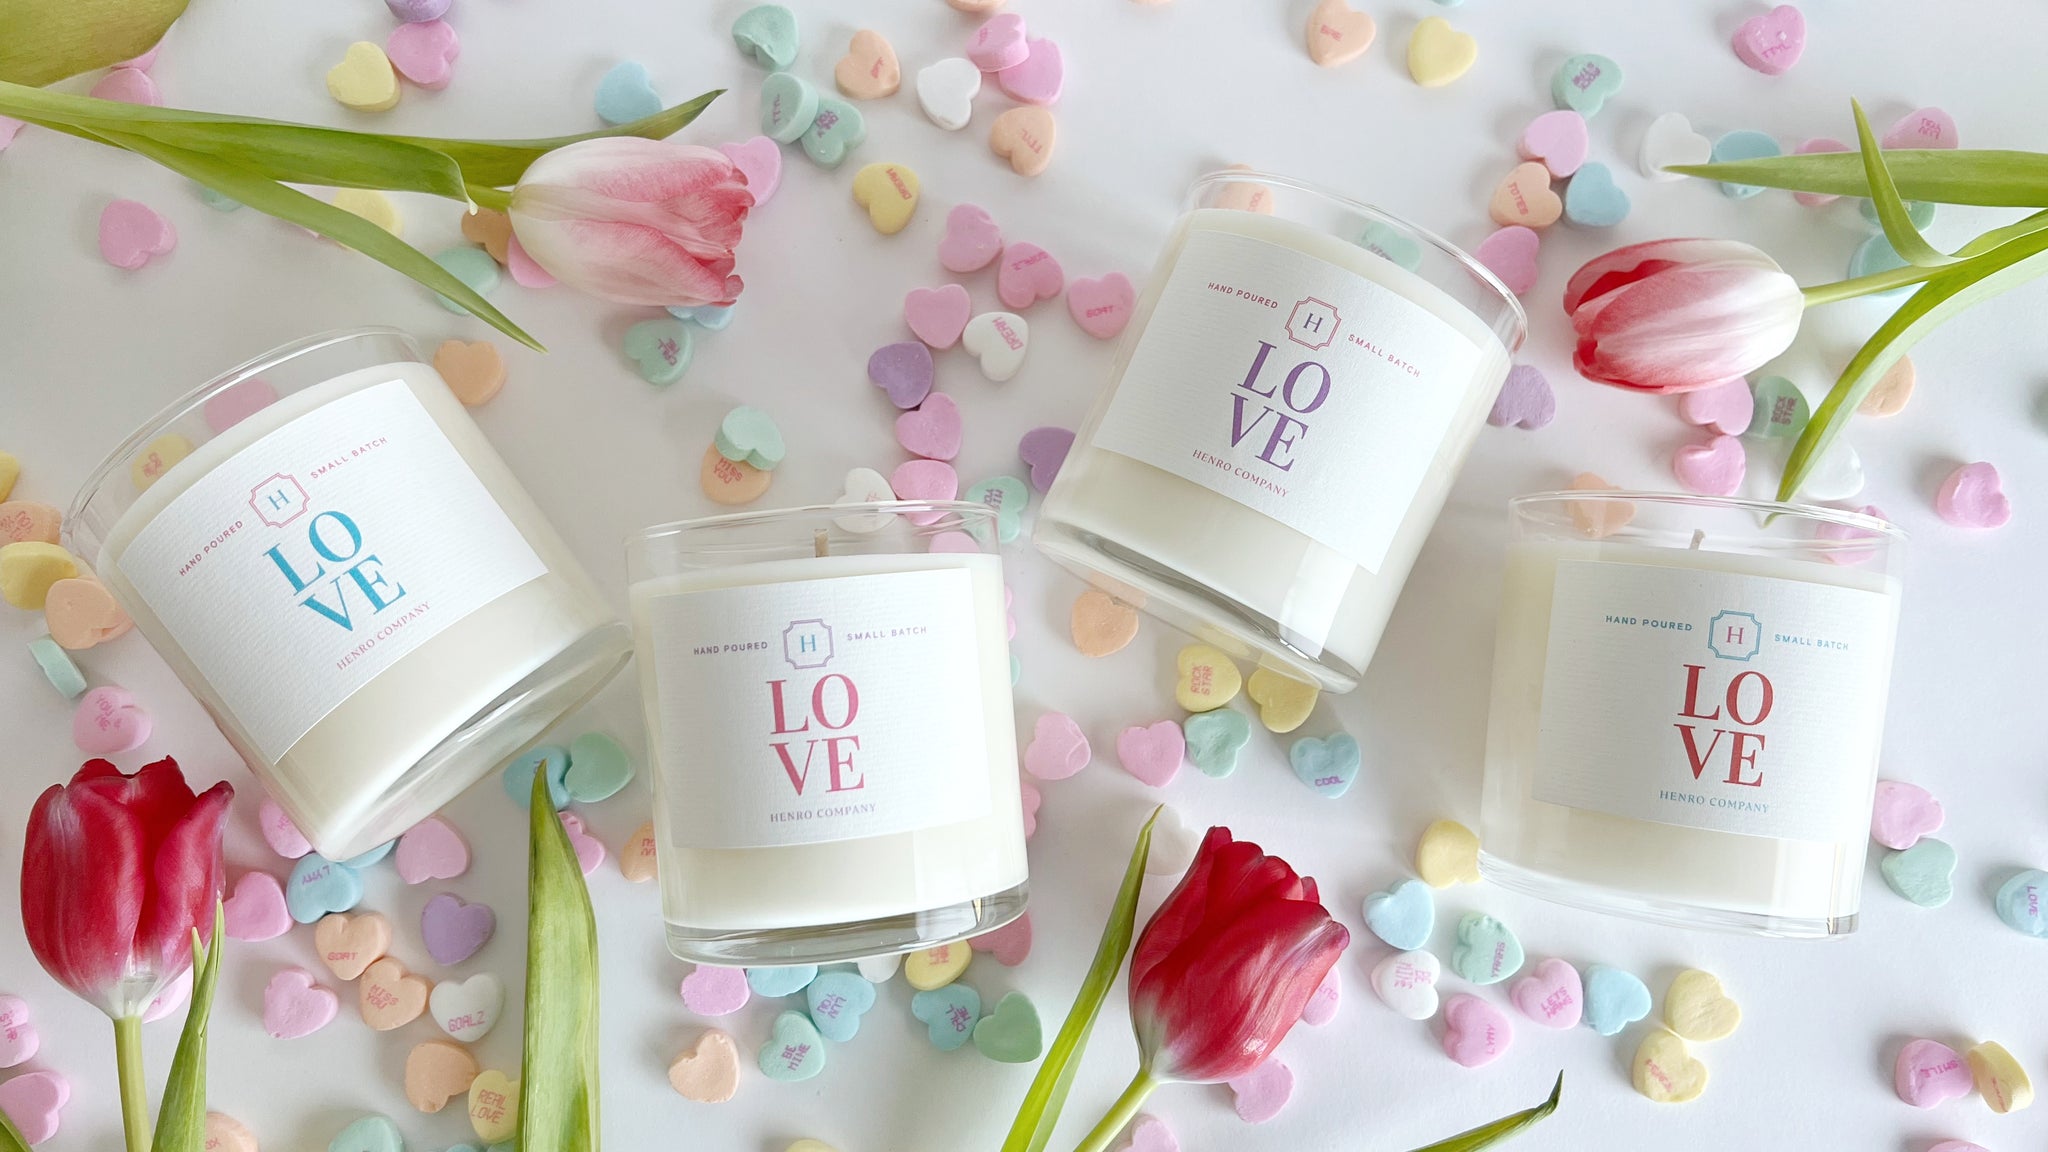 LOVE Limited Edition Tumbler Candle - 11 oz